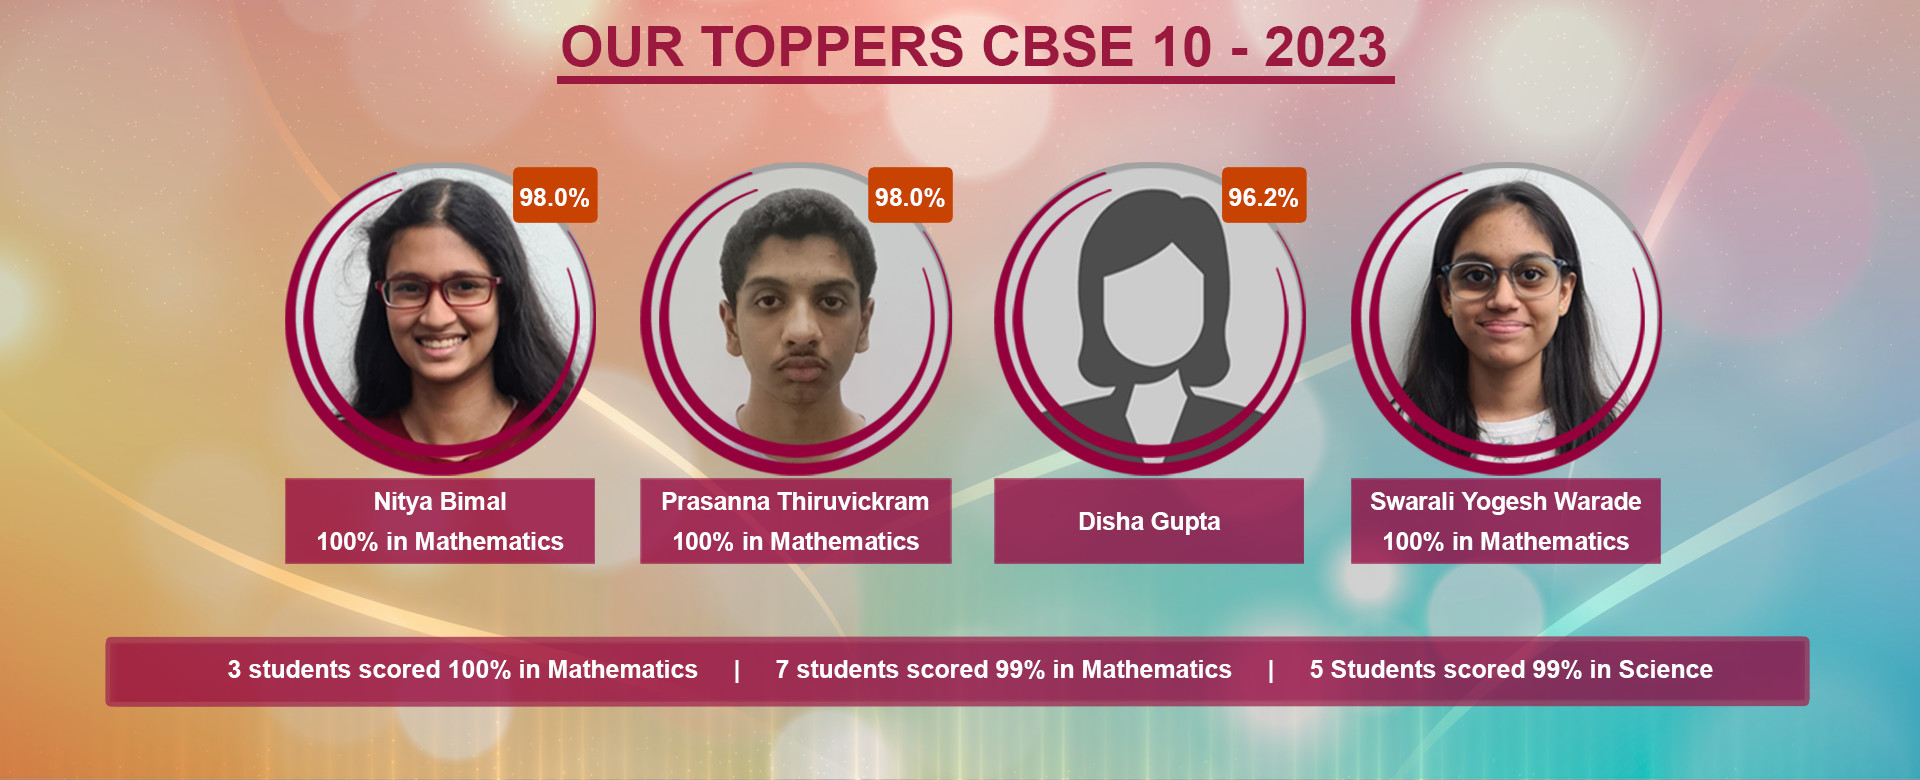 Our CBSE 10 Toppers 2023